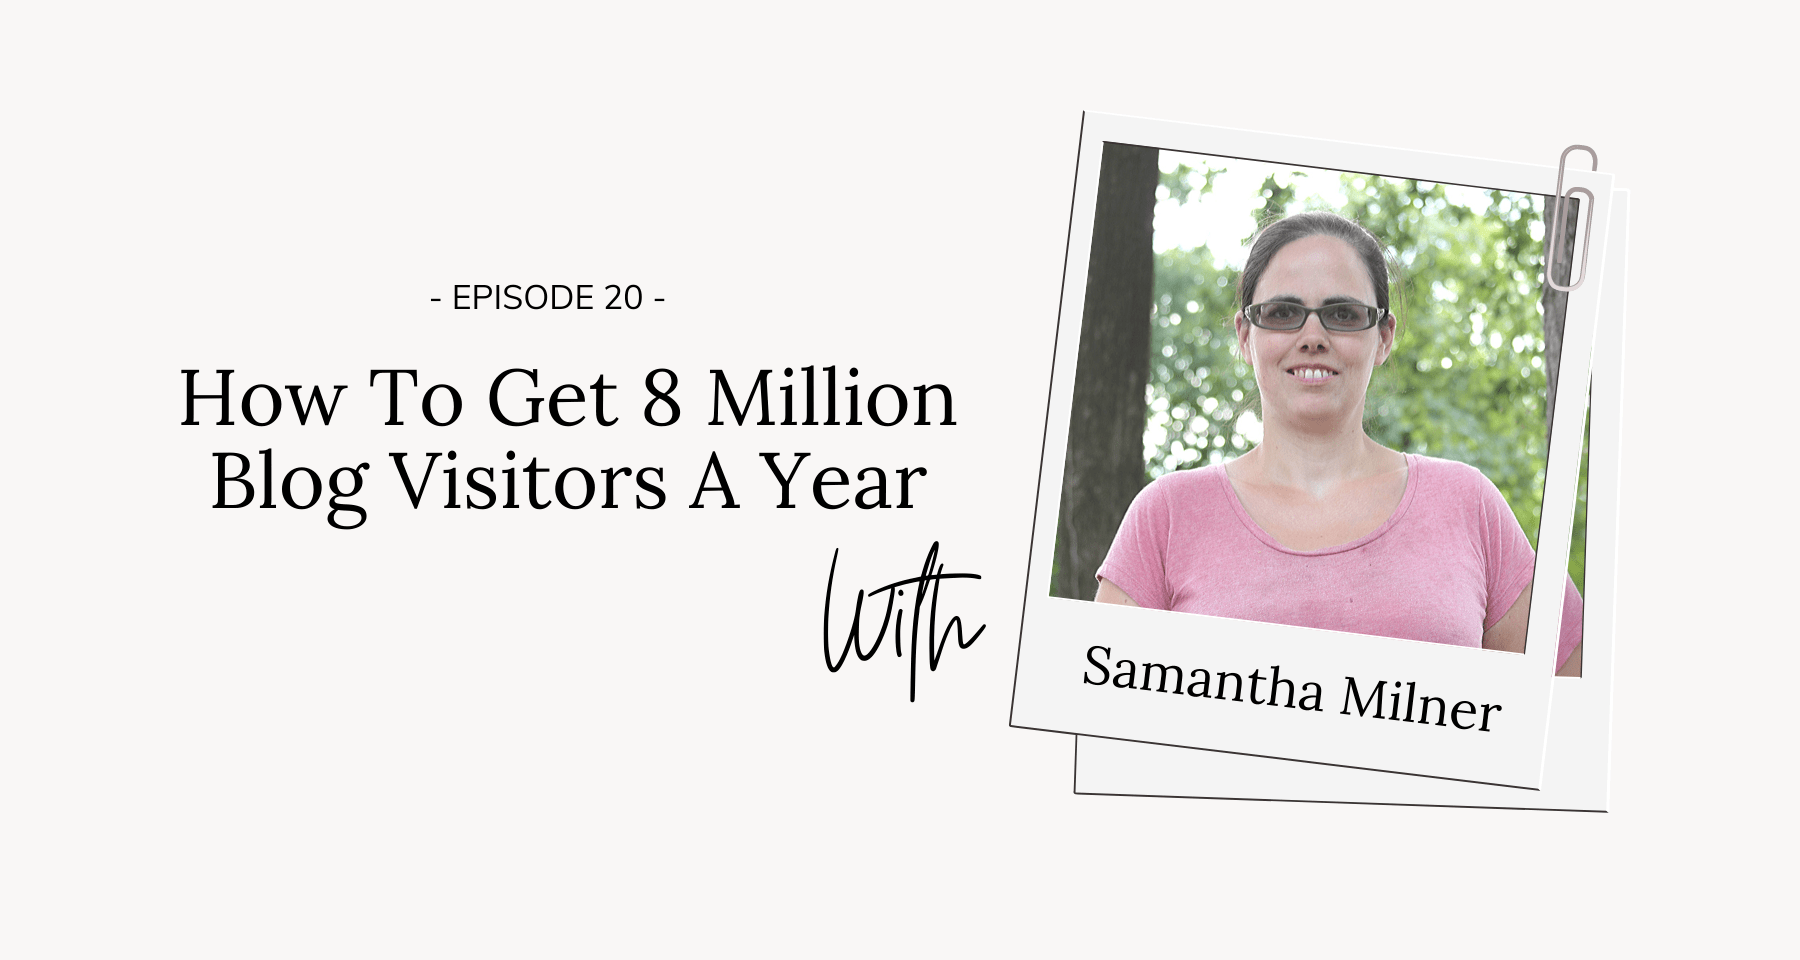 How To Get 8 Million Blog Visitors A Year